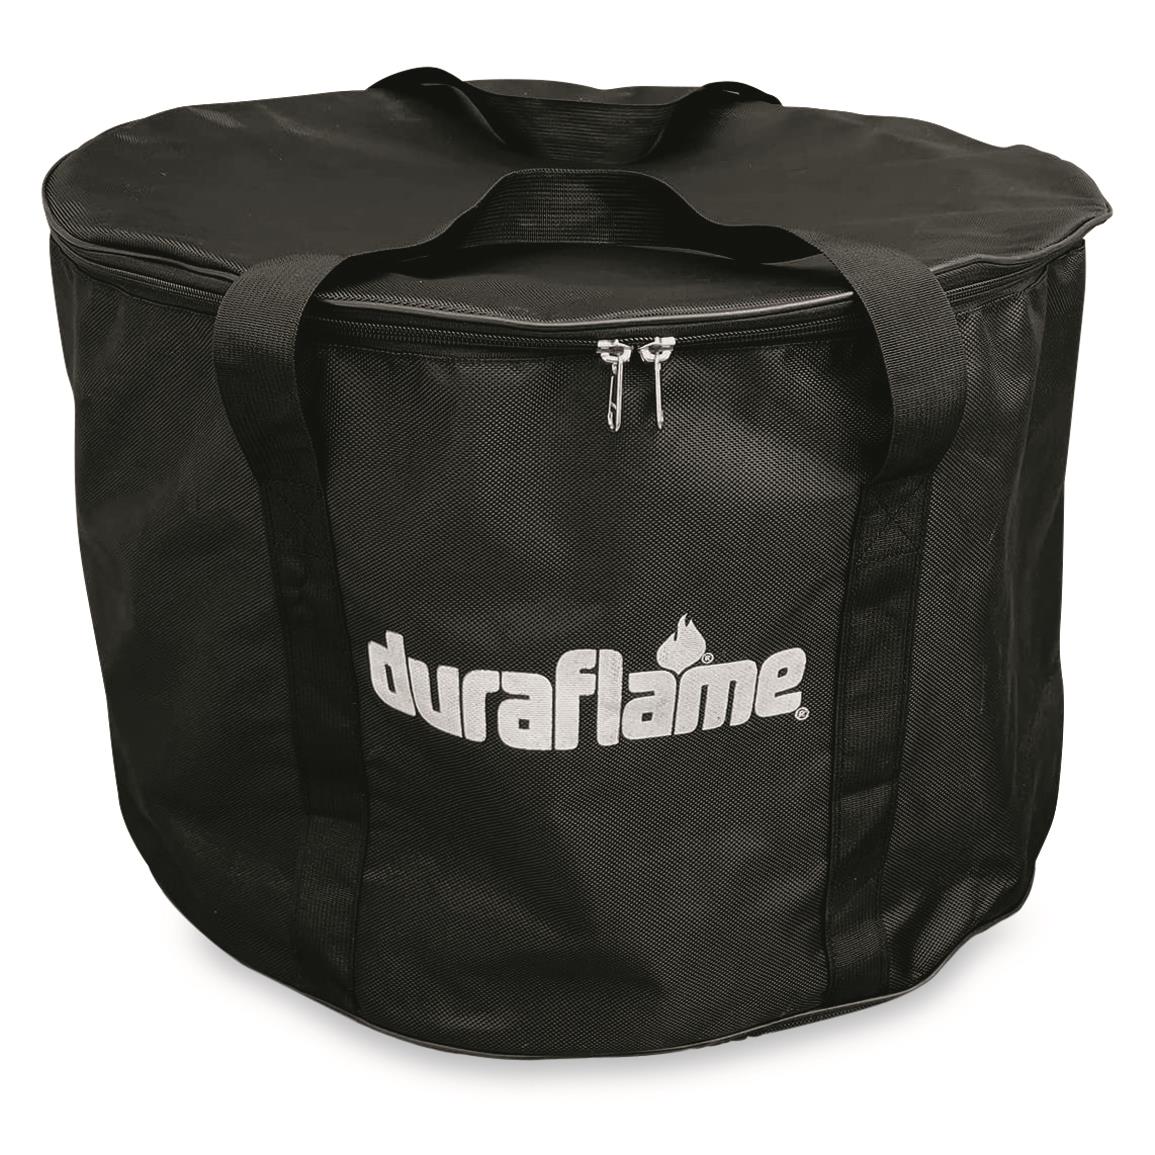 Duraflame 19" Fire Pit Carry Cover Bag